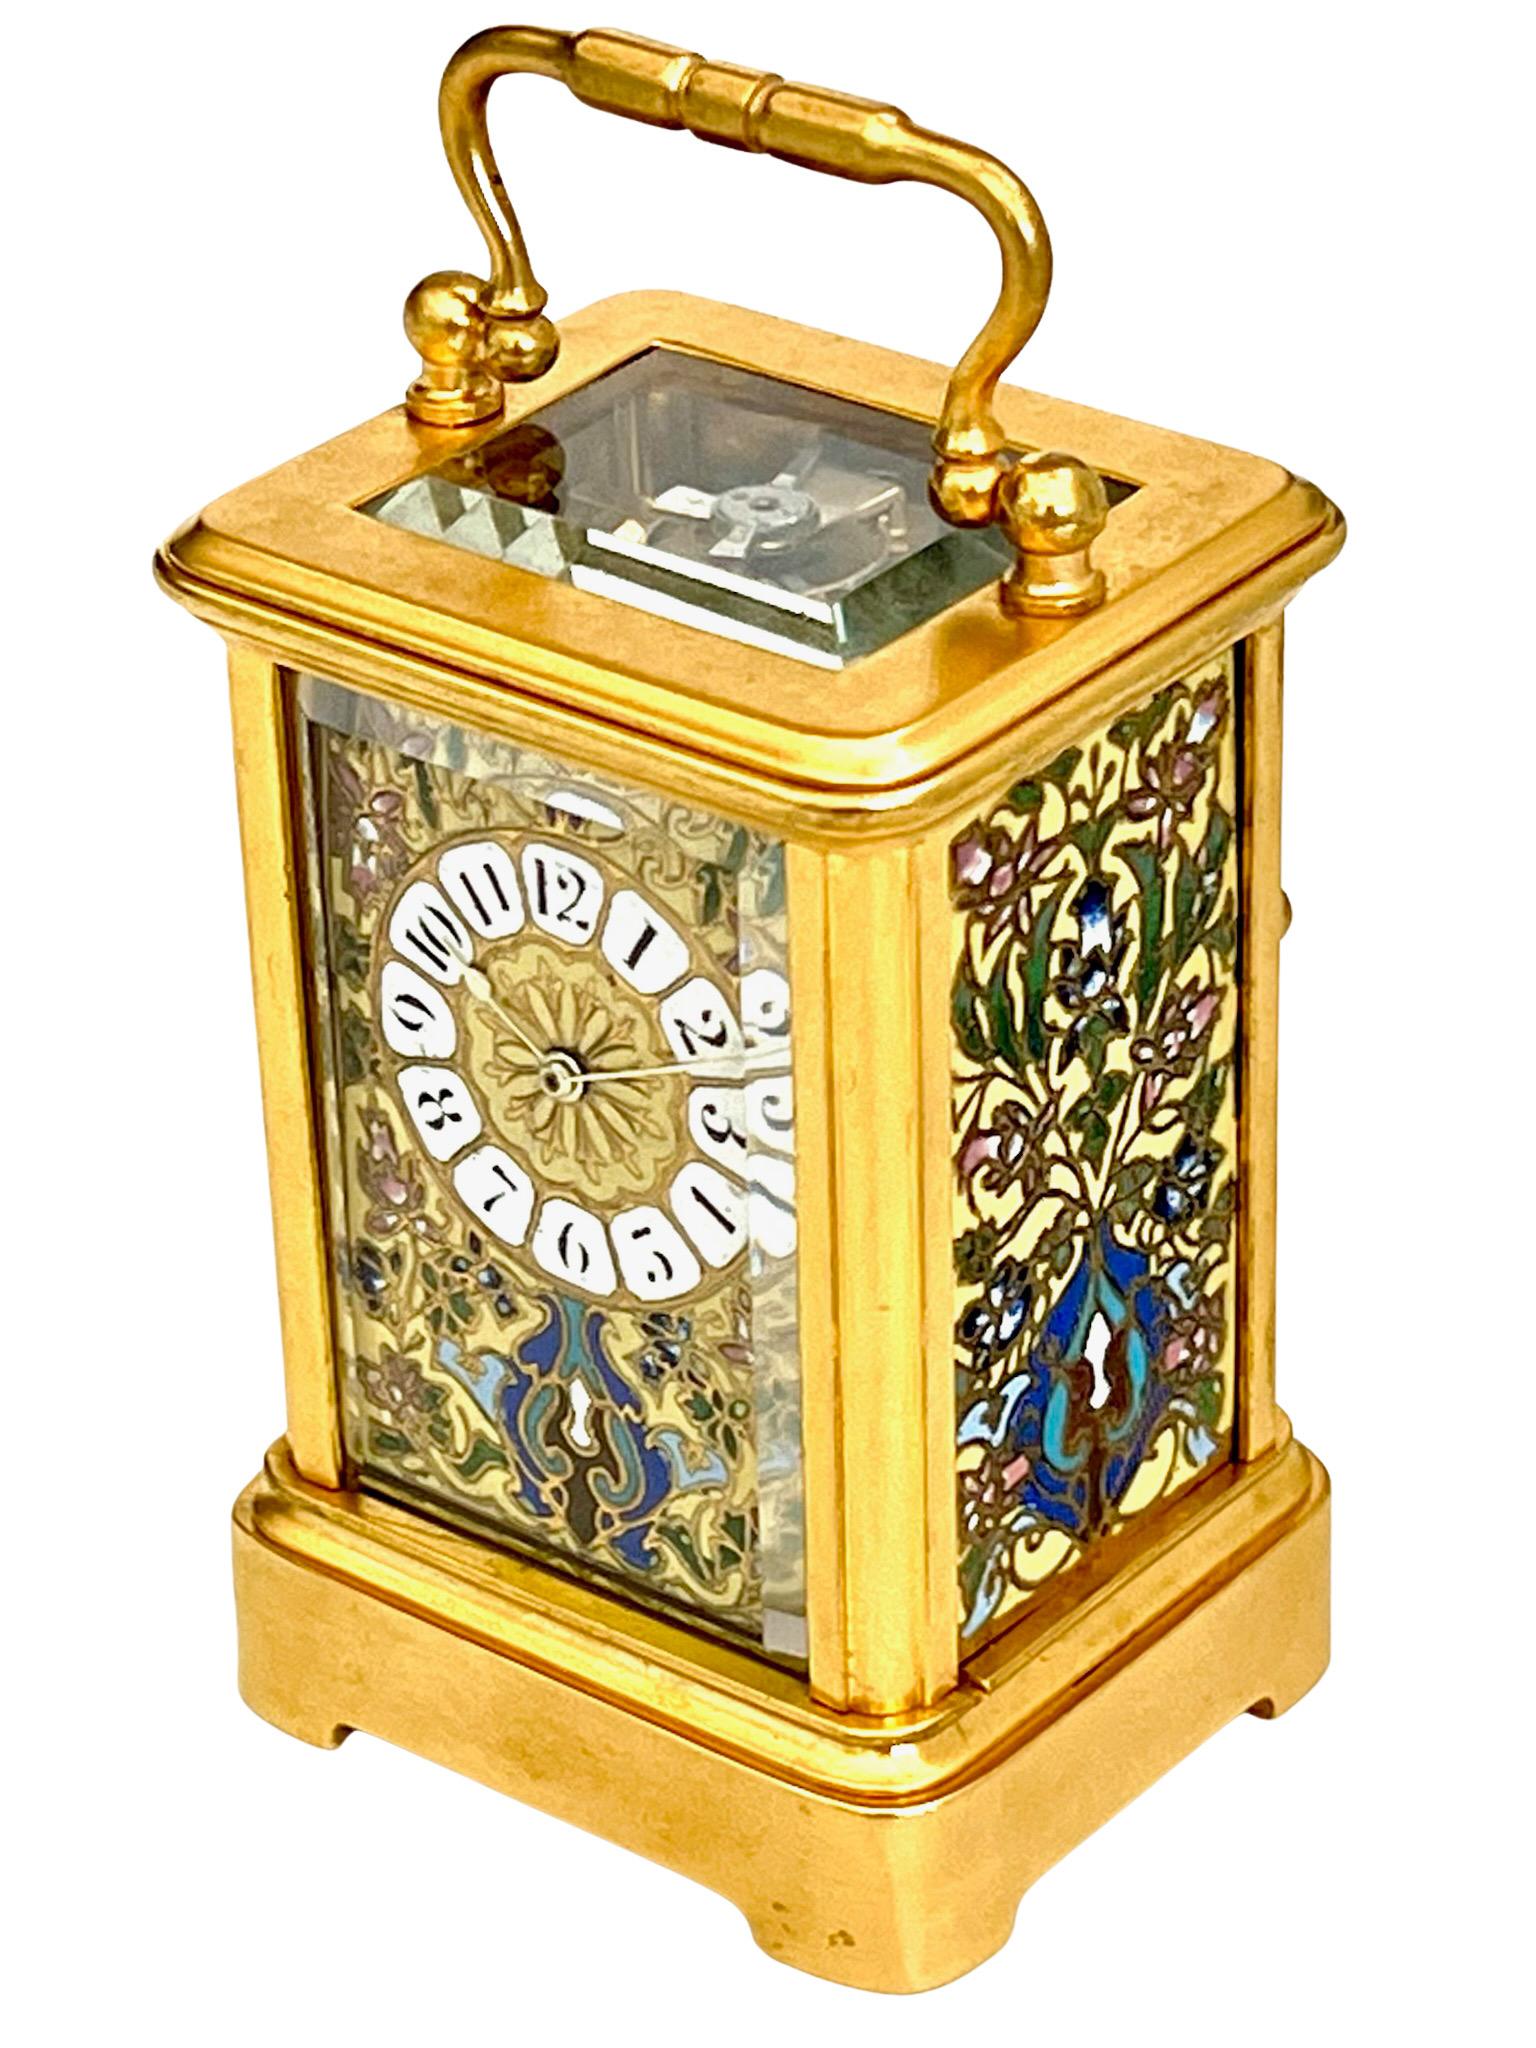 French Miniature Timepiece 8 Day Carriage Clock With Champlevé Enamel Panels For Sale 3